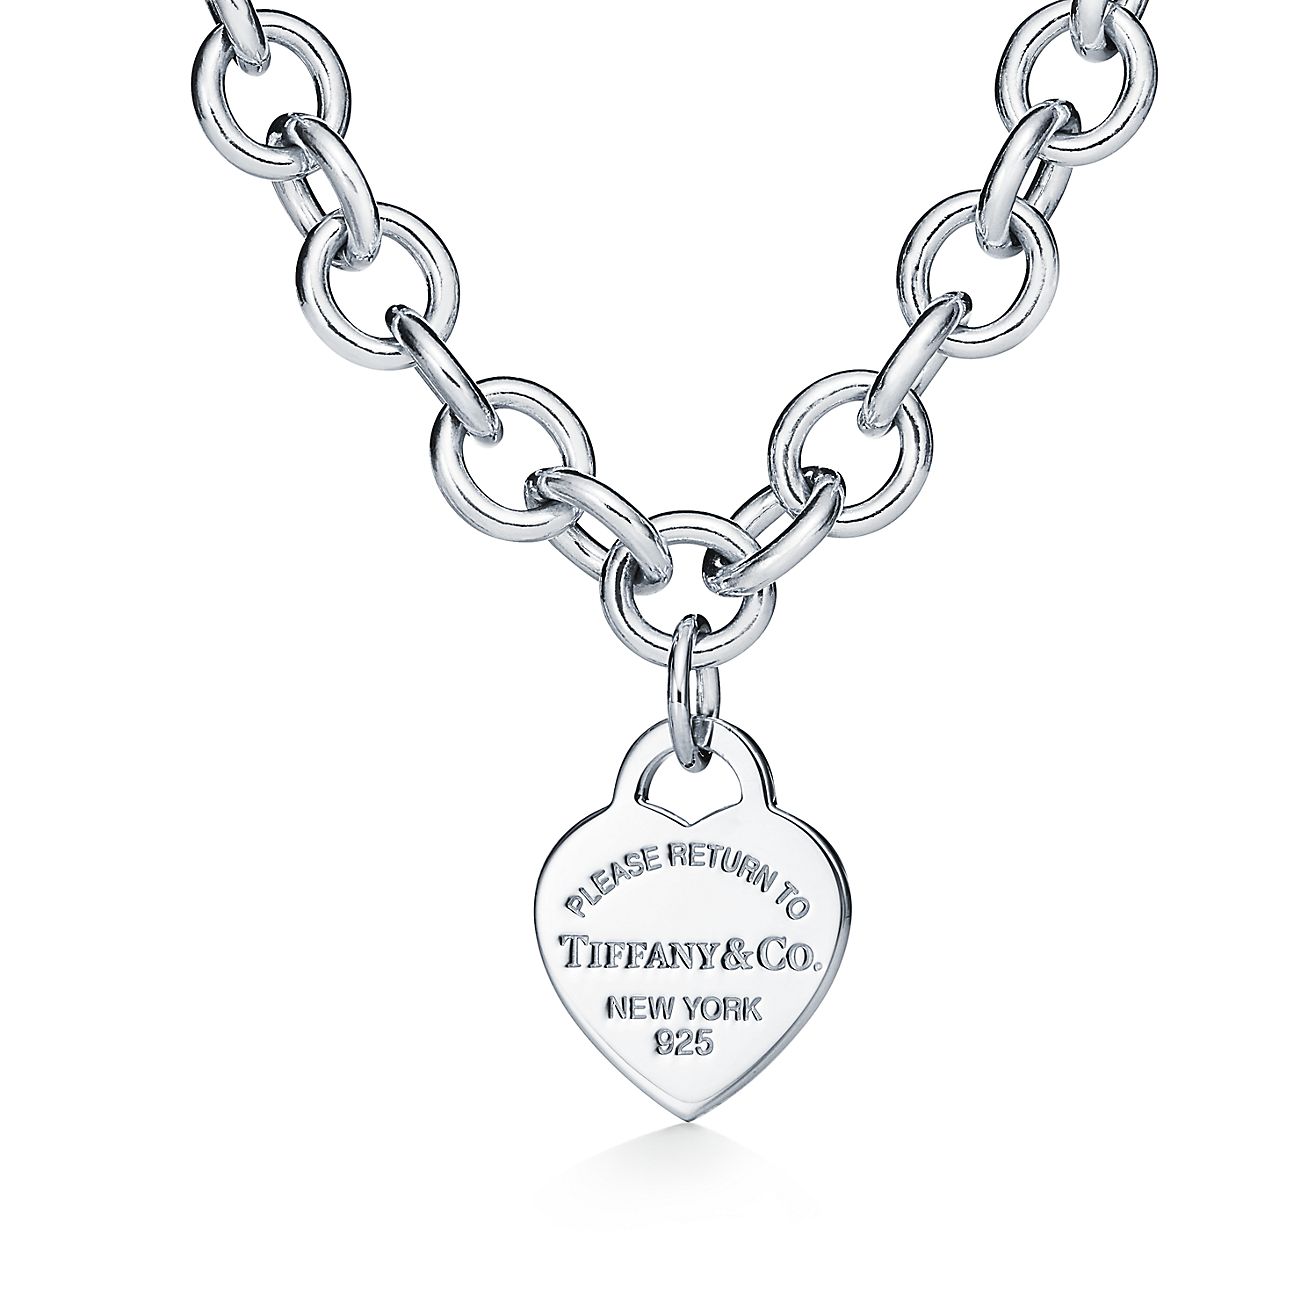 Tiffany and co silver chain